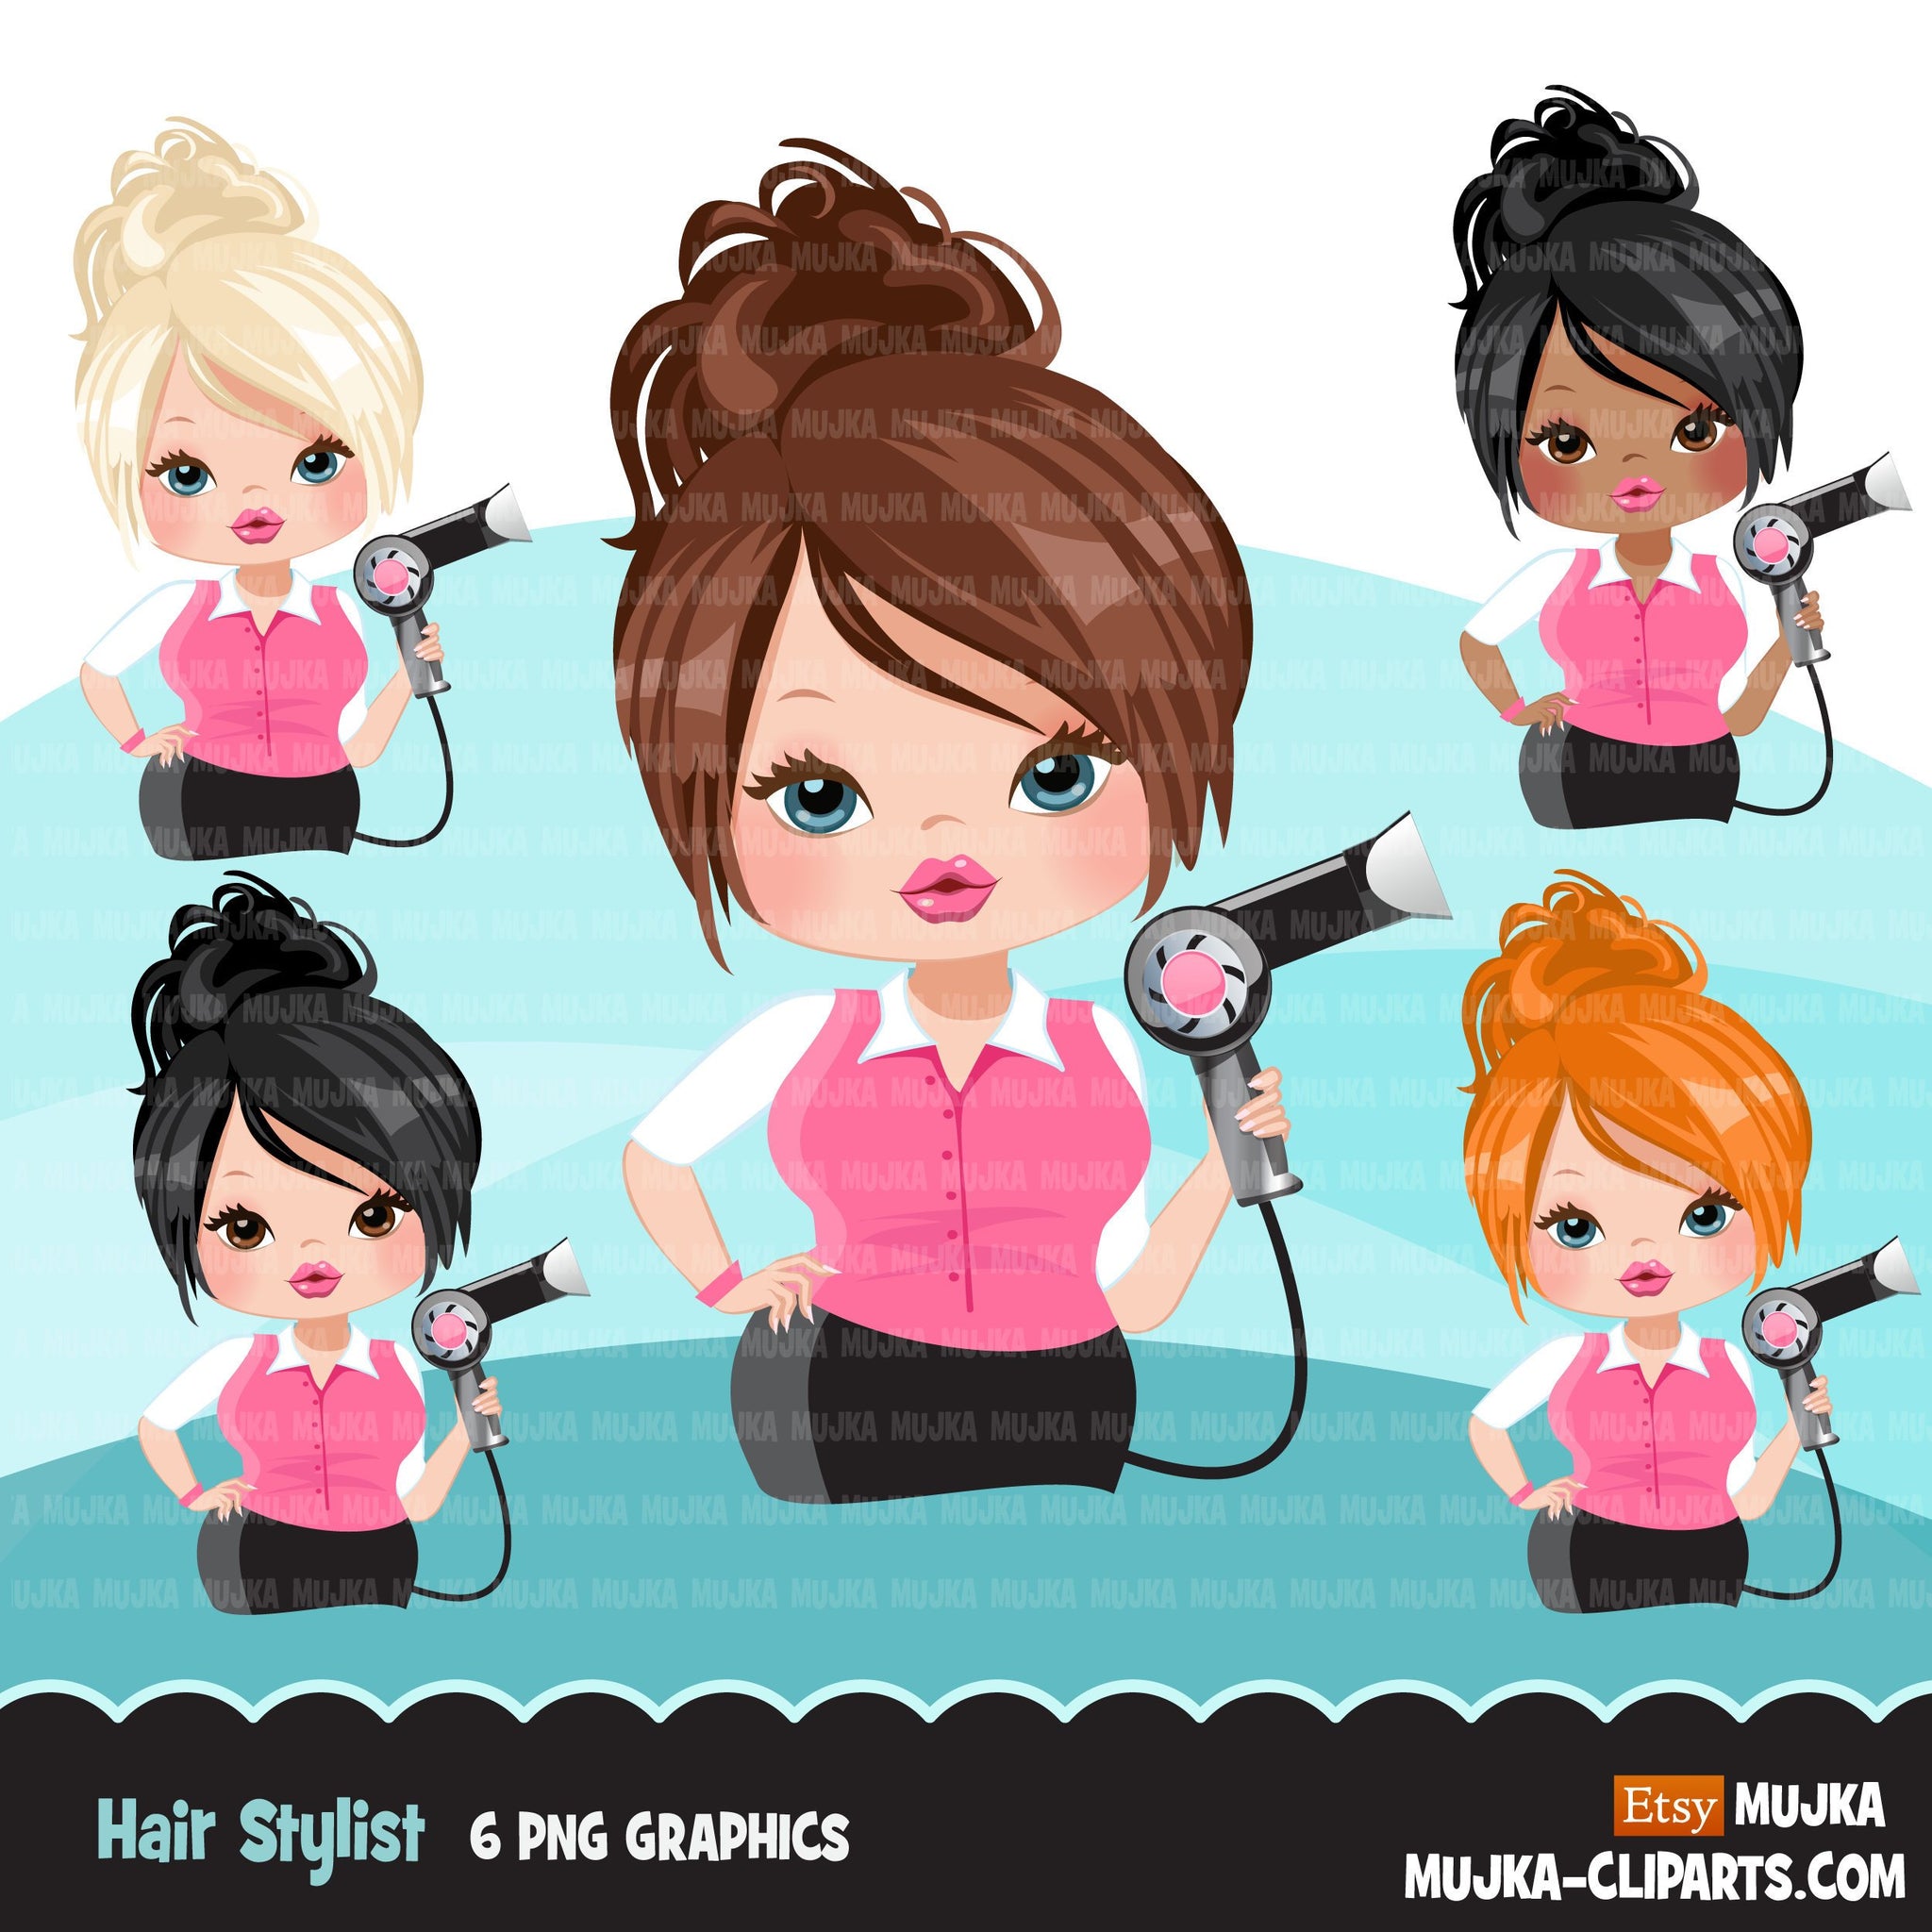 Hair stylist woman clipart avatar with hairdryer, print and cut, shop –  MUJKA CLIPARTS